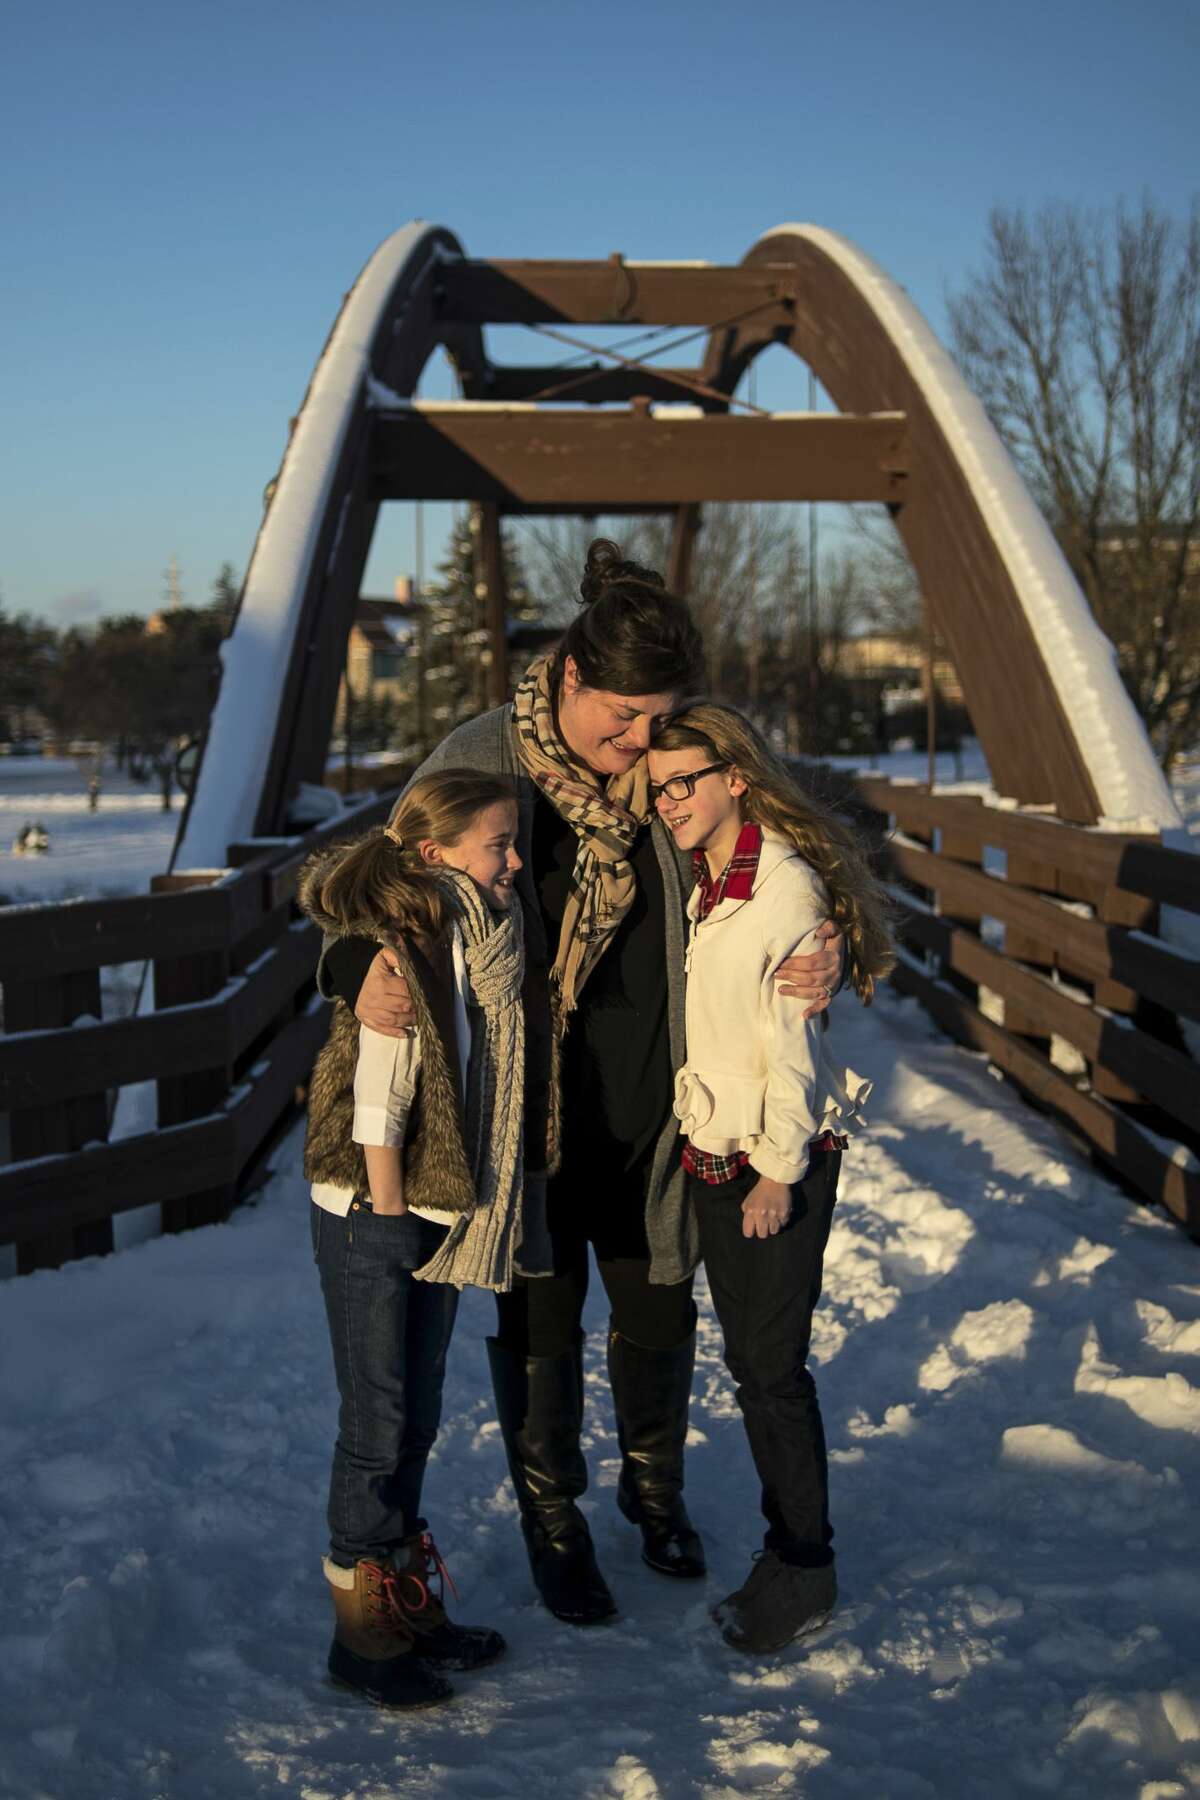 ERIN KIRKLAND | ekirkland@mdn.net Happy.pretty owner Melanie Marshall poses for a portrait on the Tridge with her daughters Chloe Marshall, 11, left, and Annabelle Marshall, 12, right.